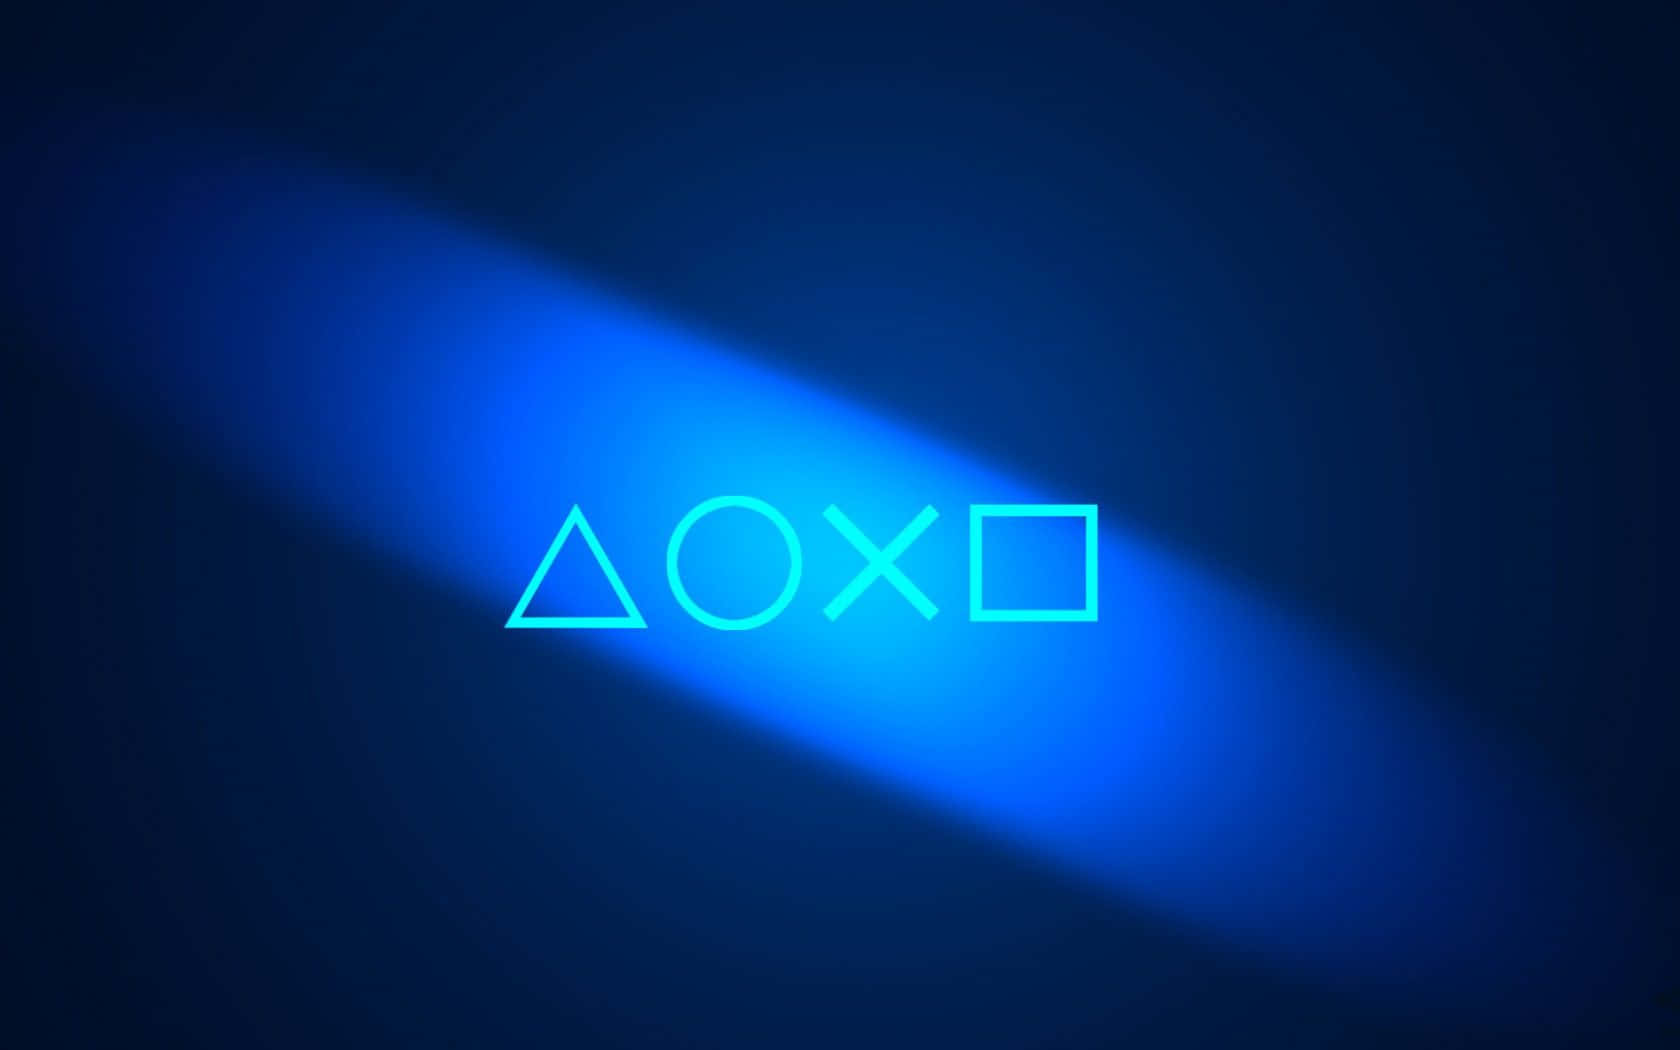 Cool Ps4 Controller Icon And Light Blue Oval Glow Background